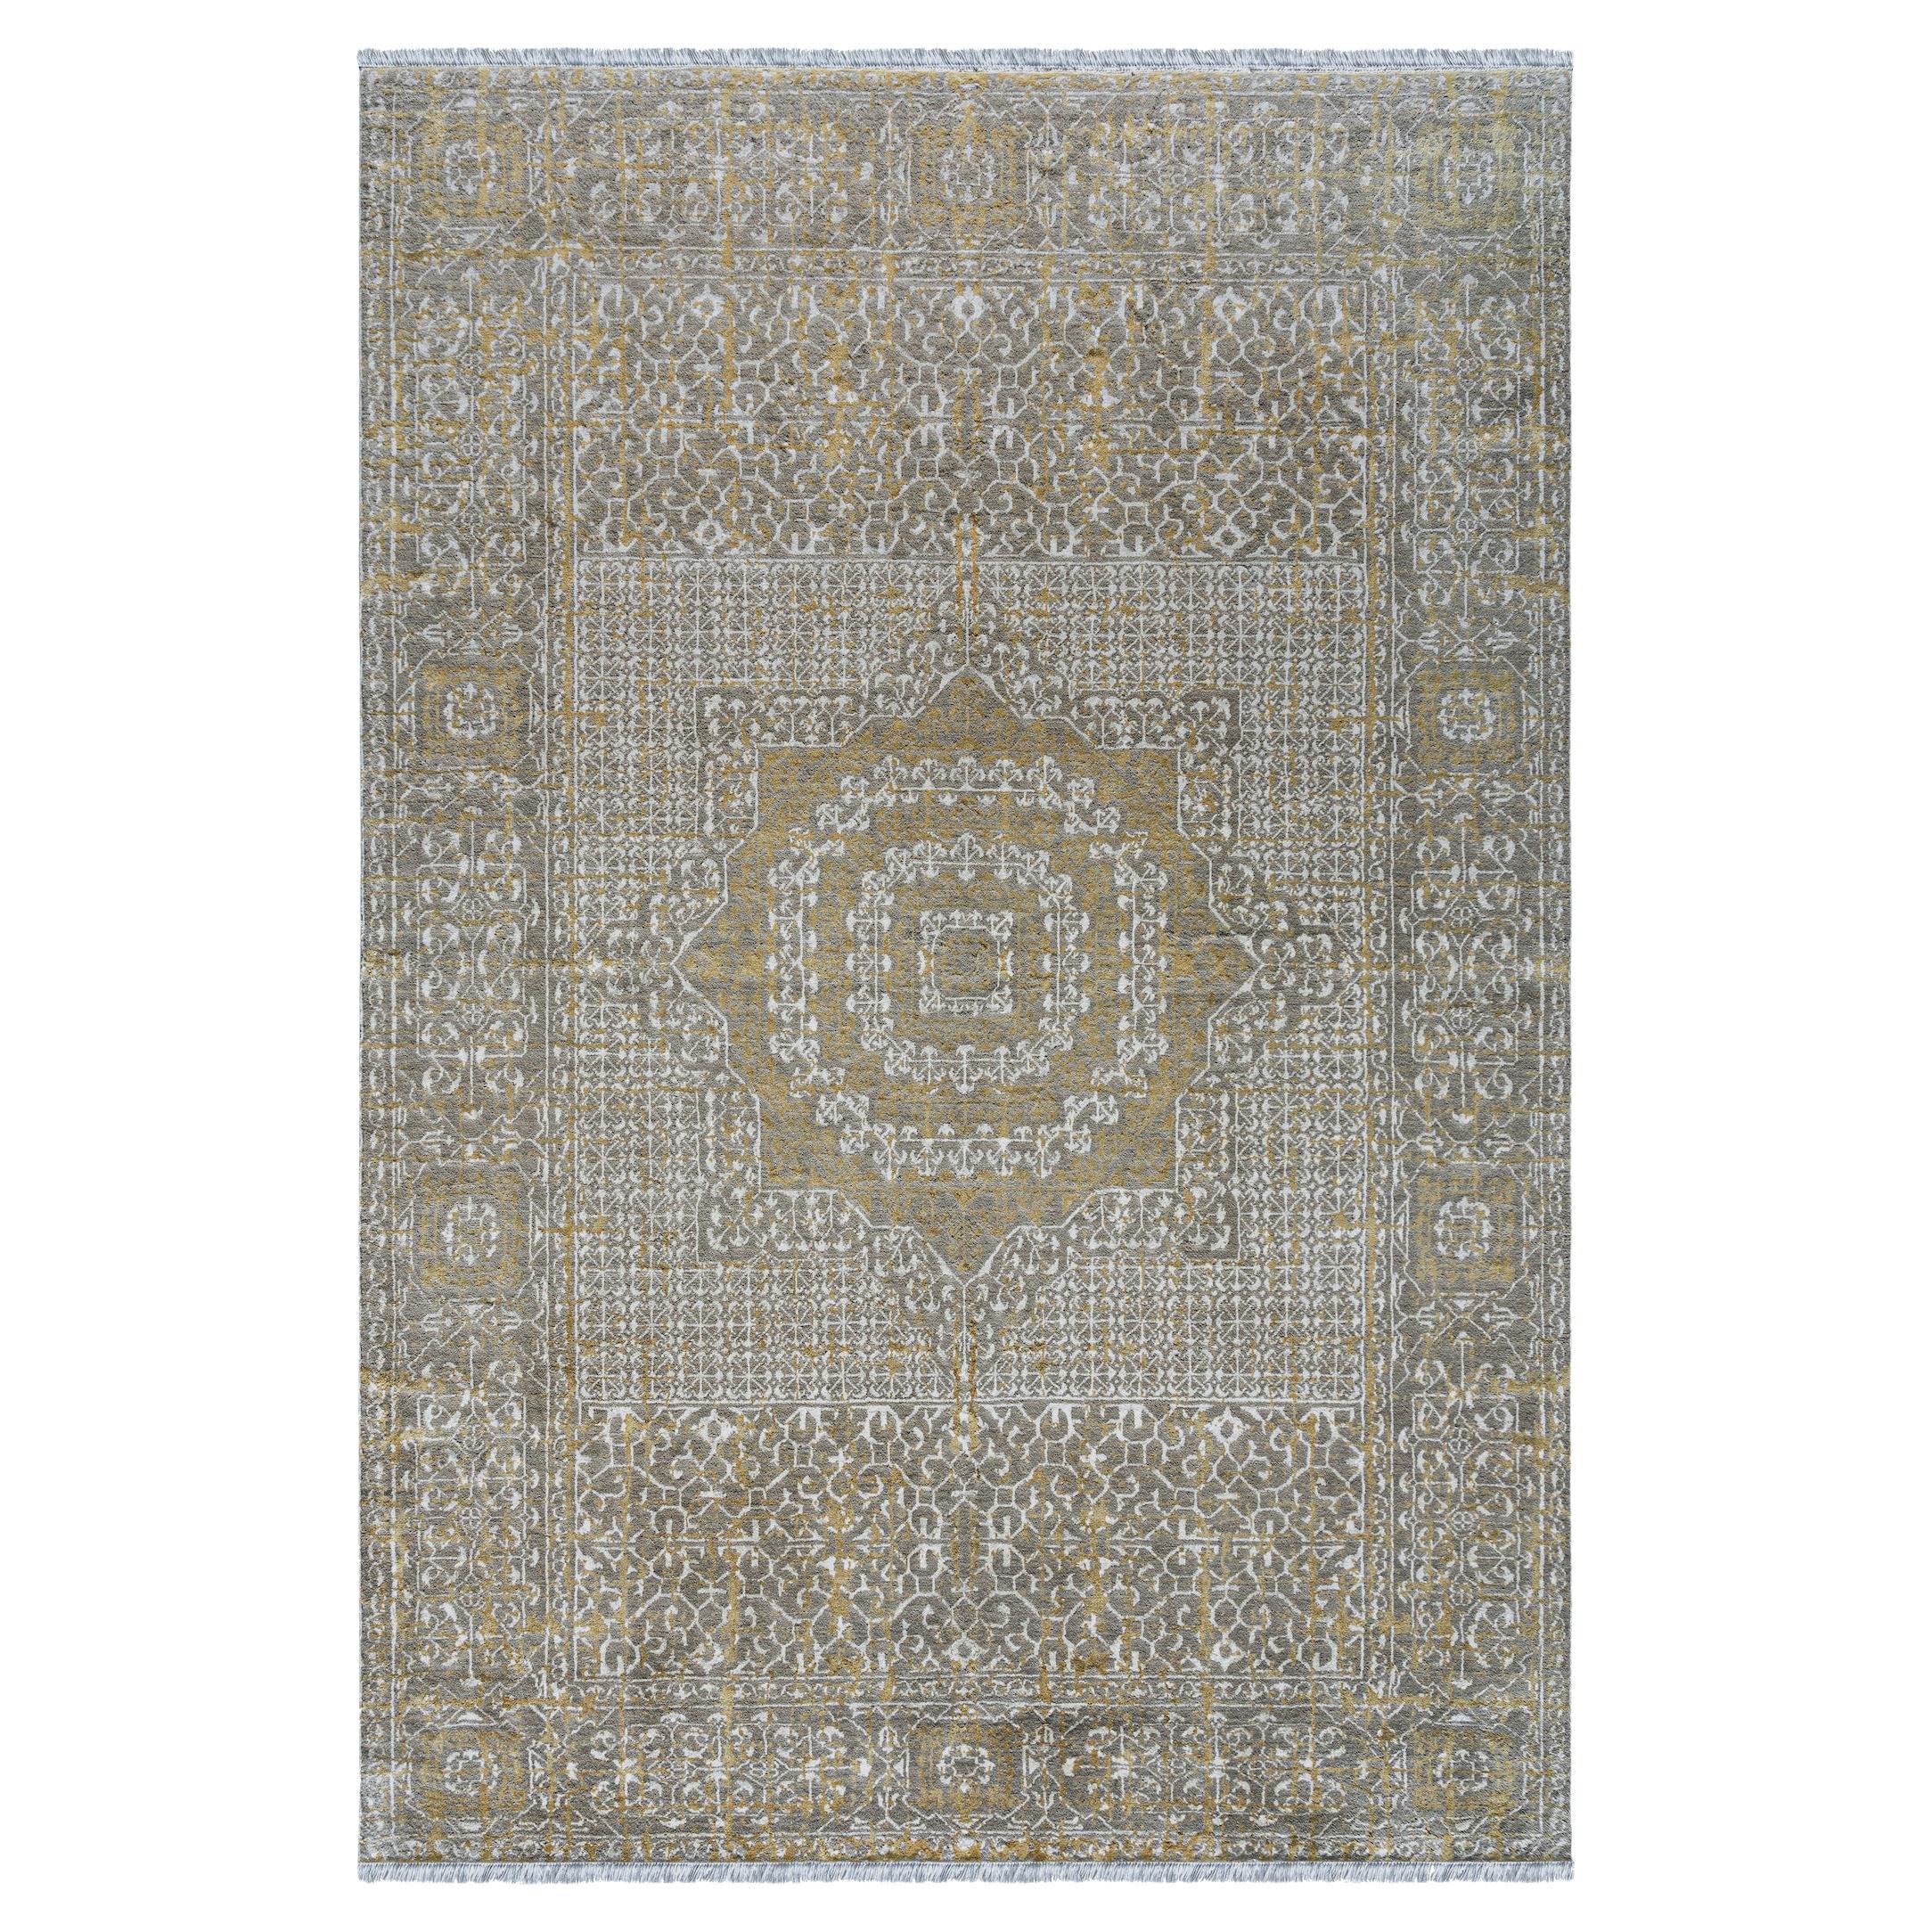 Kahhal Looms Mamluk Medallion Infused "Gold" Hand-Knotted 350x250 Rug For Sale